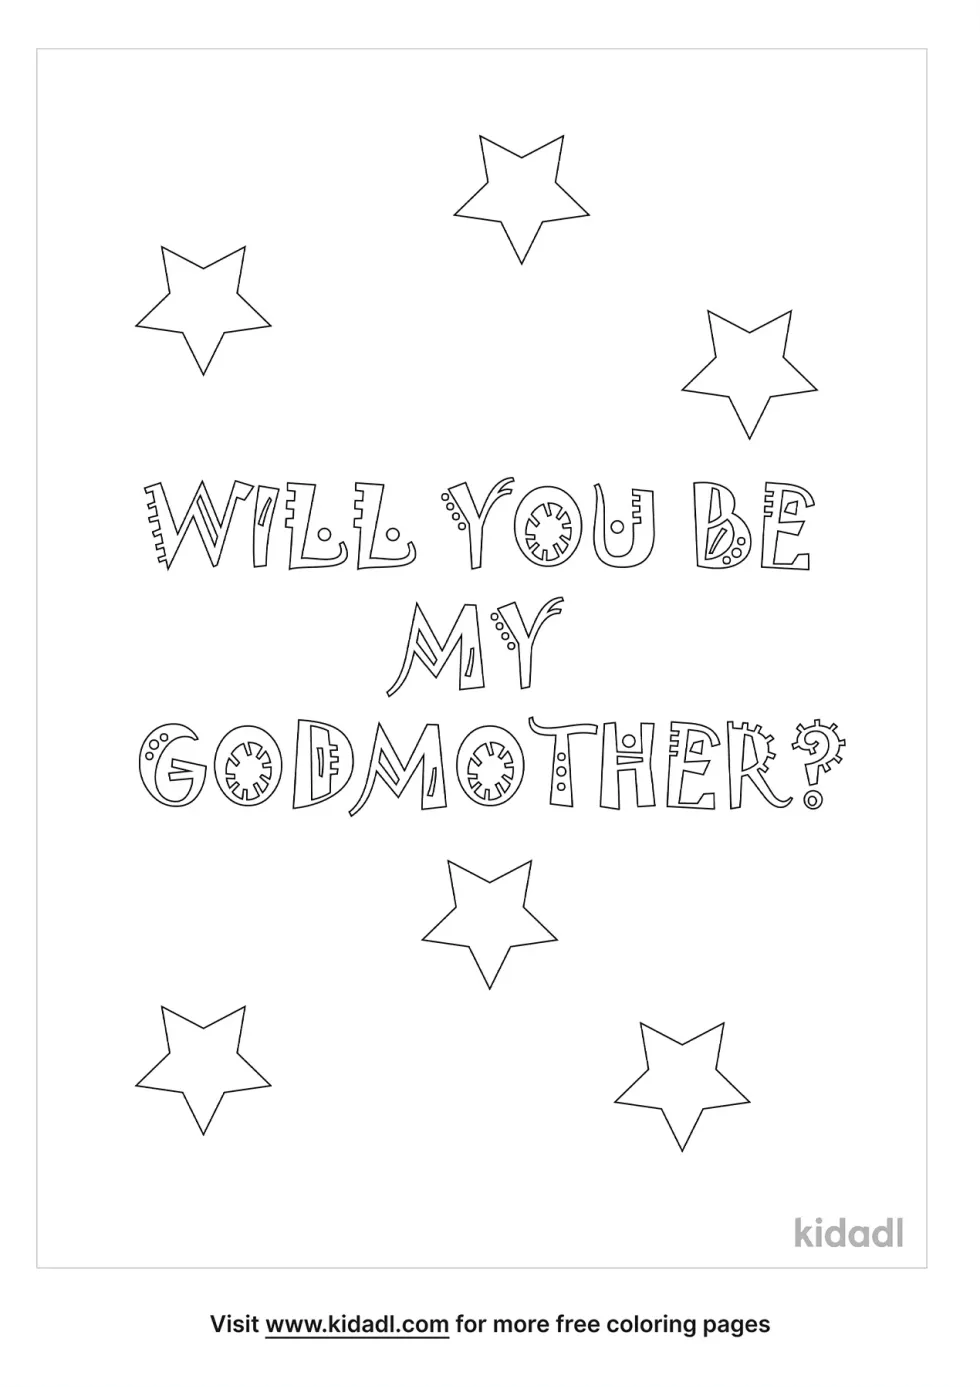 Godmother's Card Coloring Page